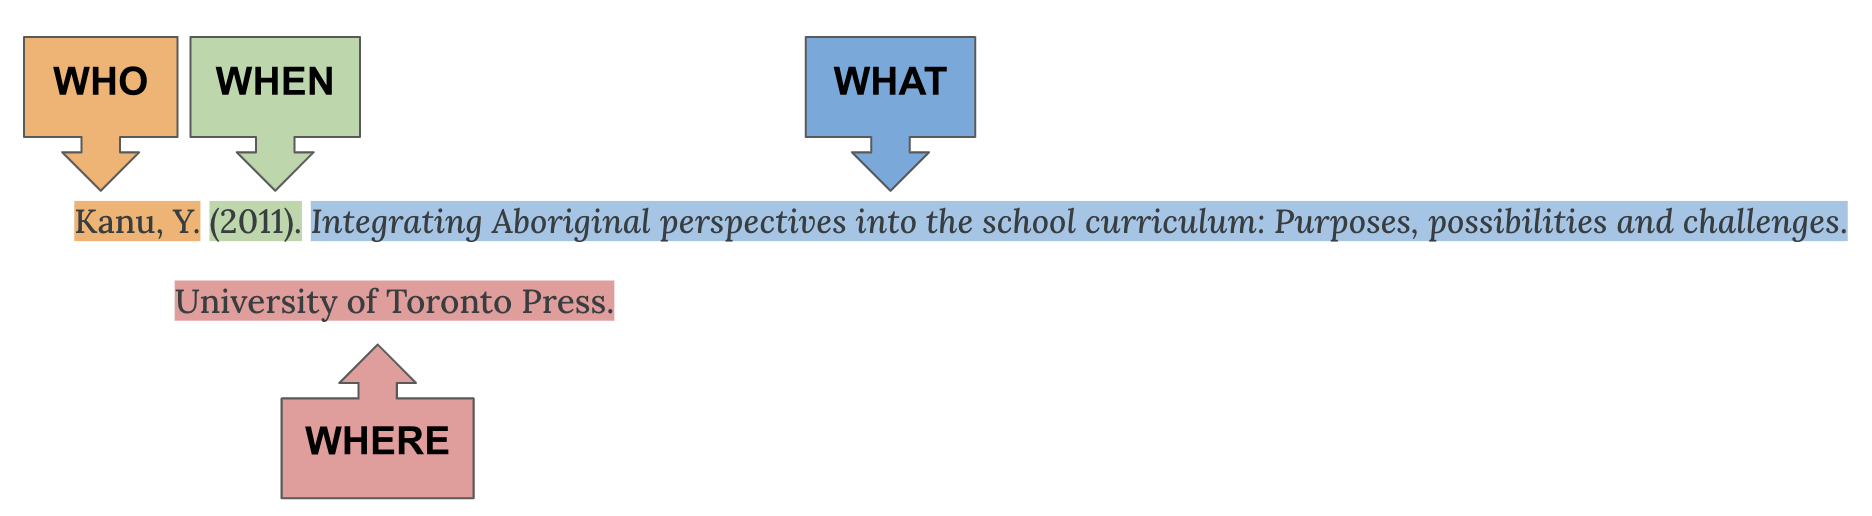 Reference citation for an ebook highlighted in different colours and labels for each 4W: who, when, what, where. Citation is Kanu, Y. (2011). Integrating Aboriginal perspectives into the school curriculum: Purposes, possibilities and challenges. University of Toronto Press.